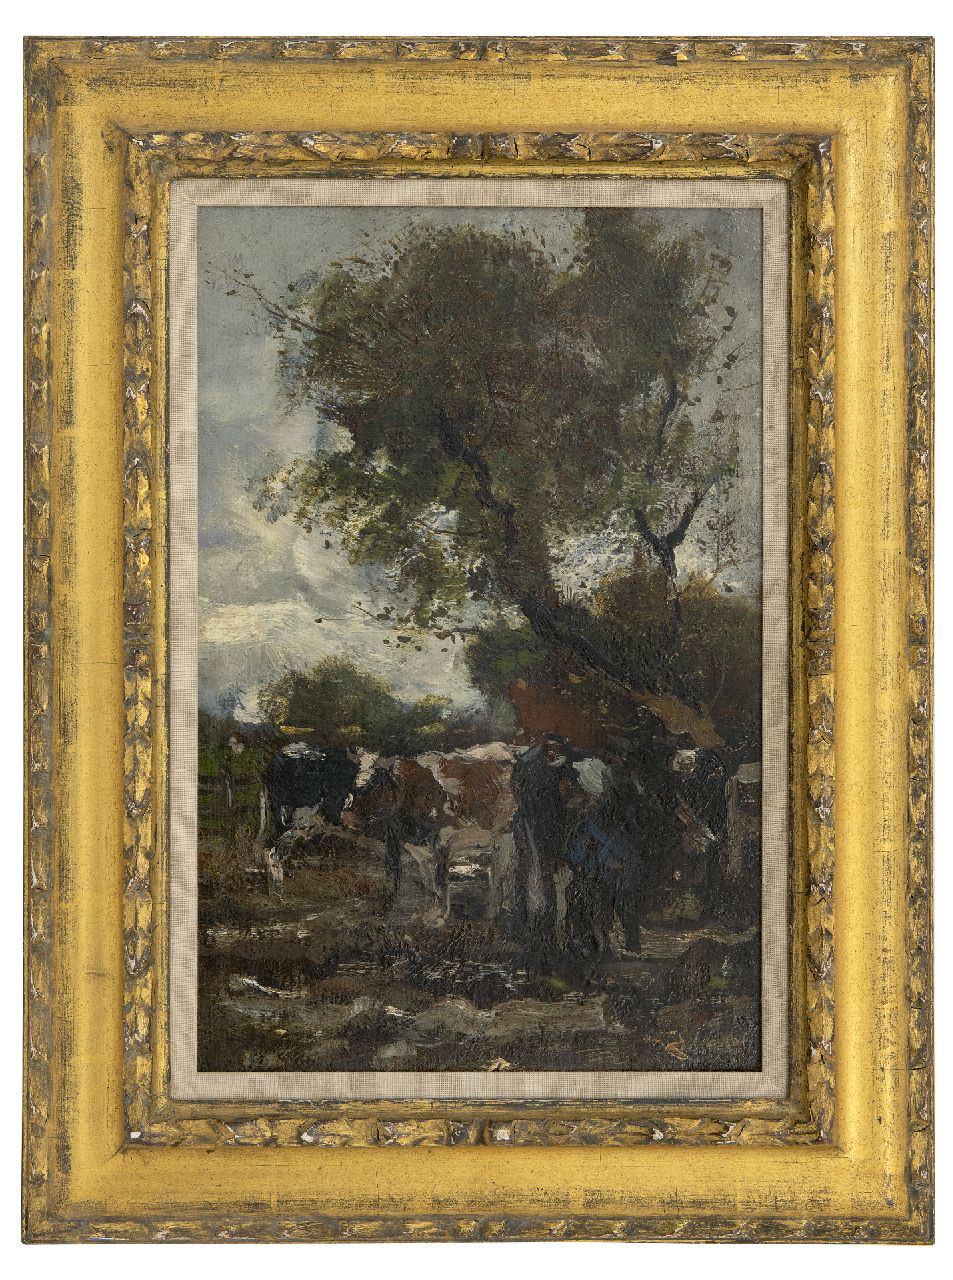 Jansen W.G.F.  | 'Willem' George Frederik Jansen | Paintings offered for sale | Milking time, oil on canvas laid down on panel 41.1 x 27.3 cm, signed l.r.